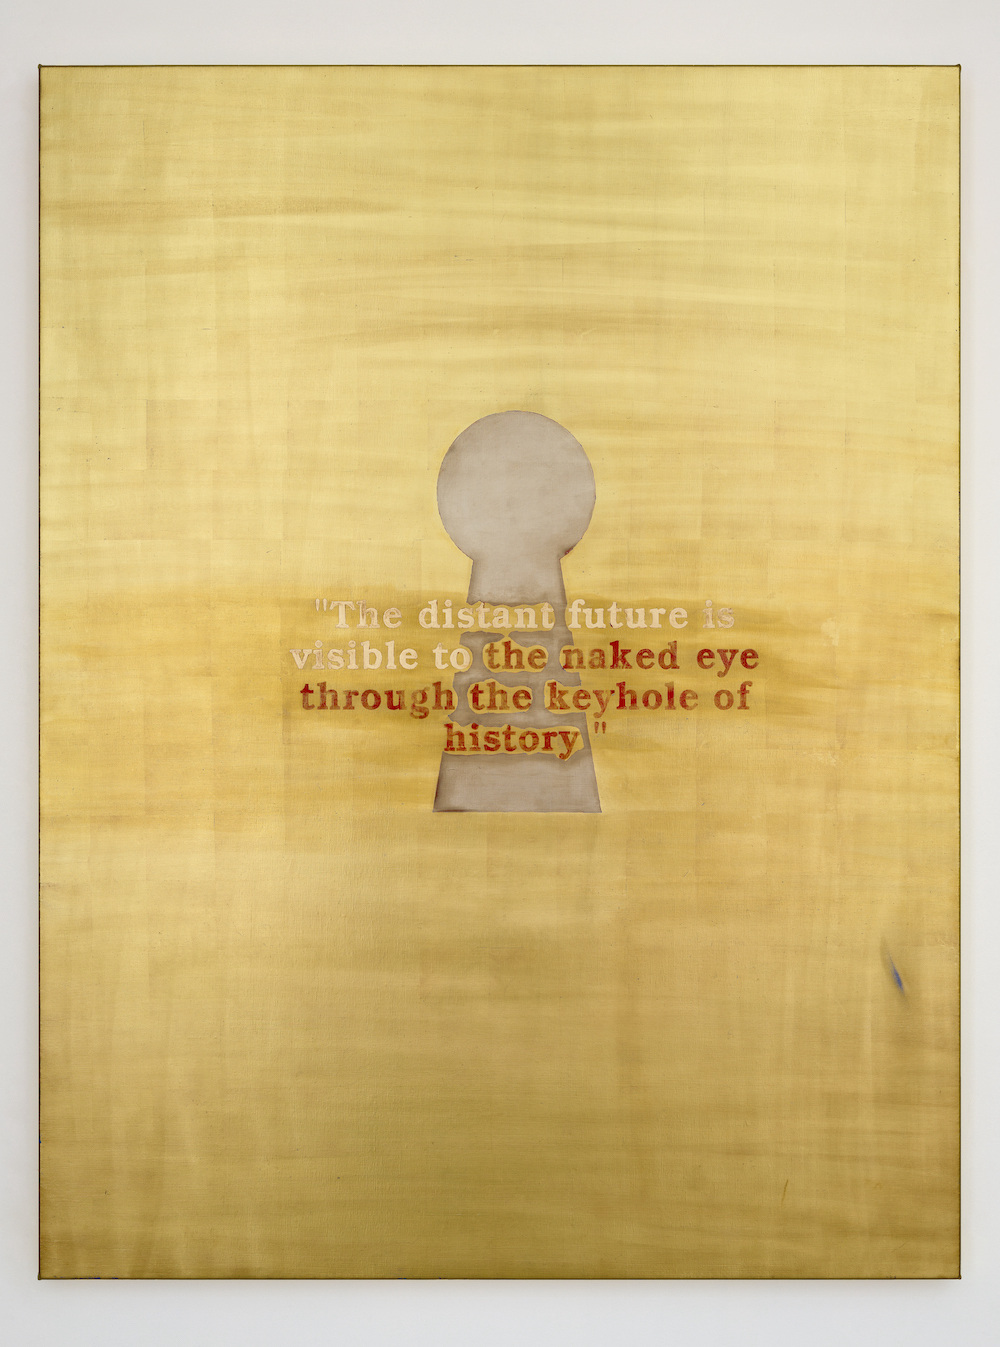 PATRIOT 9, Jenny Holzer, 2022 24k gold and antique gold leaf and oil on linen 259.7 x 200.7 cm / 102 1/4 x 79in. Image coutesy the artist and Hauser & Wirth. Photography by Filip Wolak.